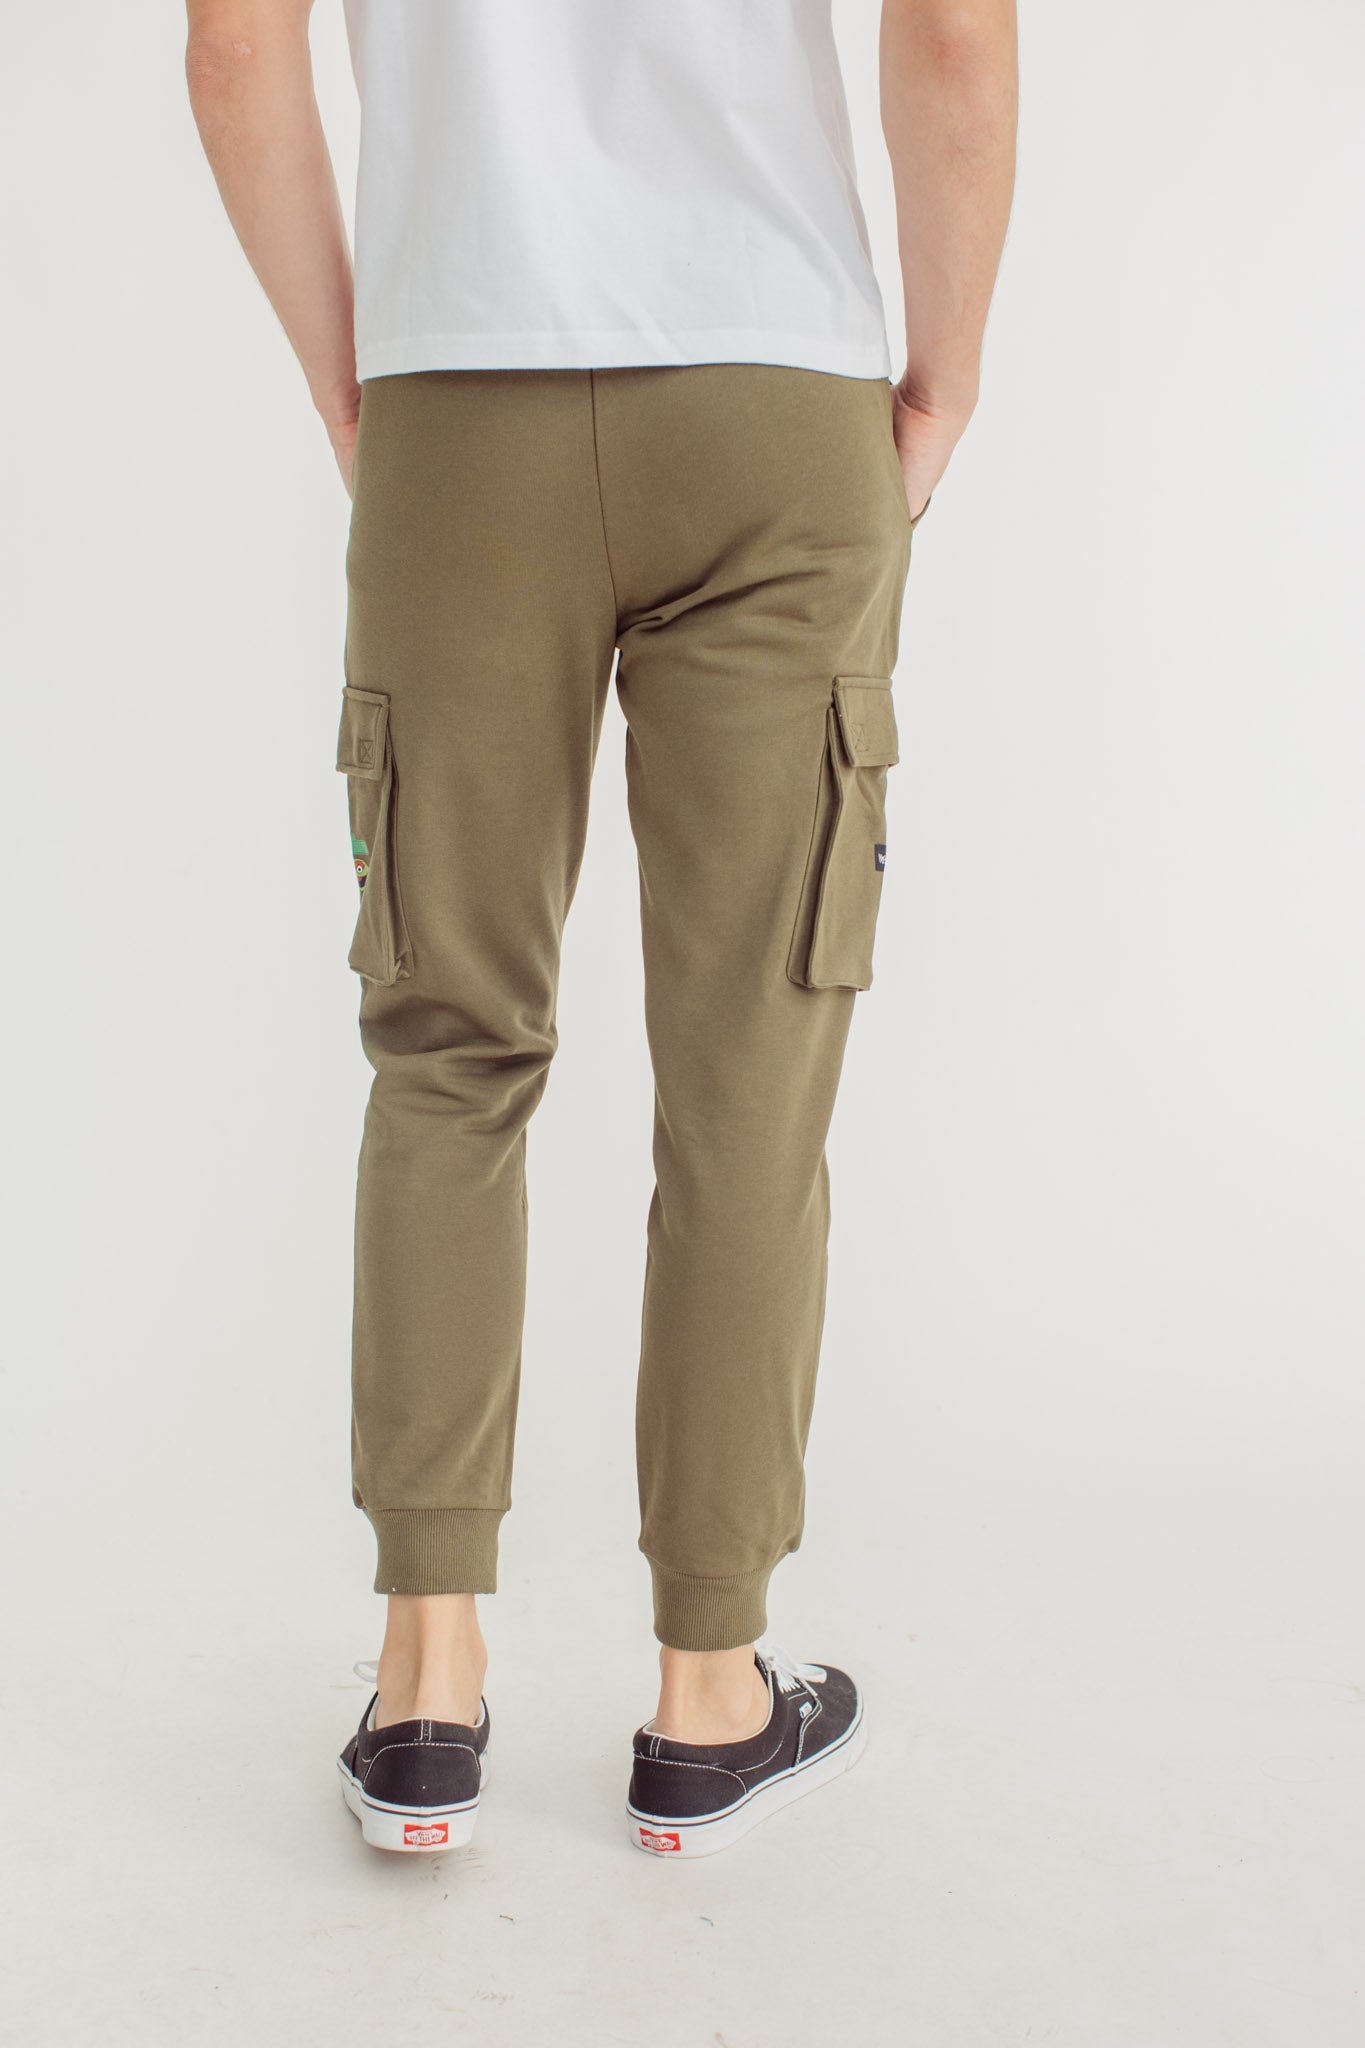 Olive Cargo Pocket pants with Design - Mossimo PH